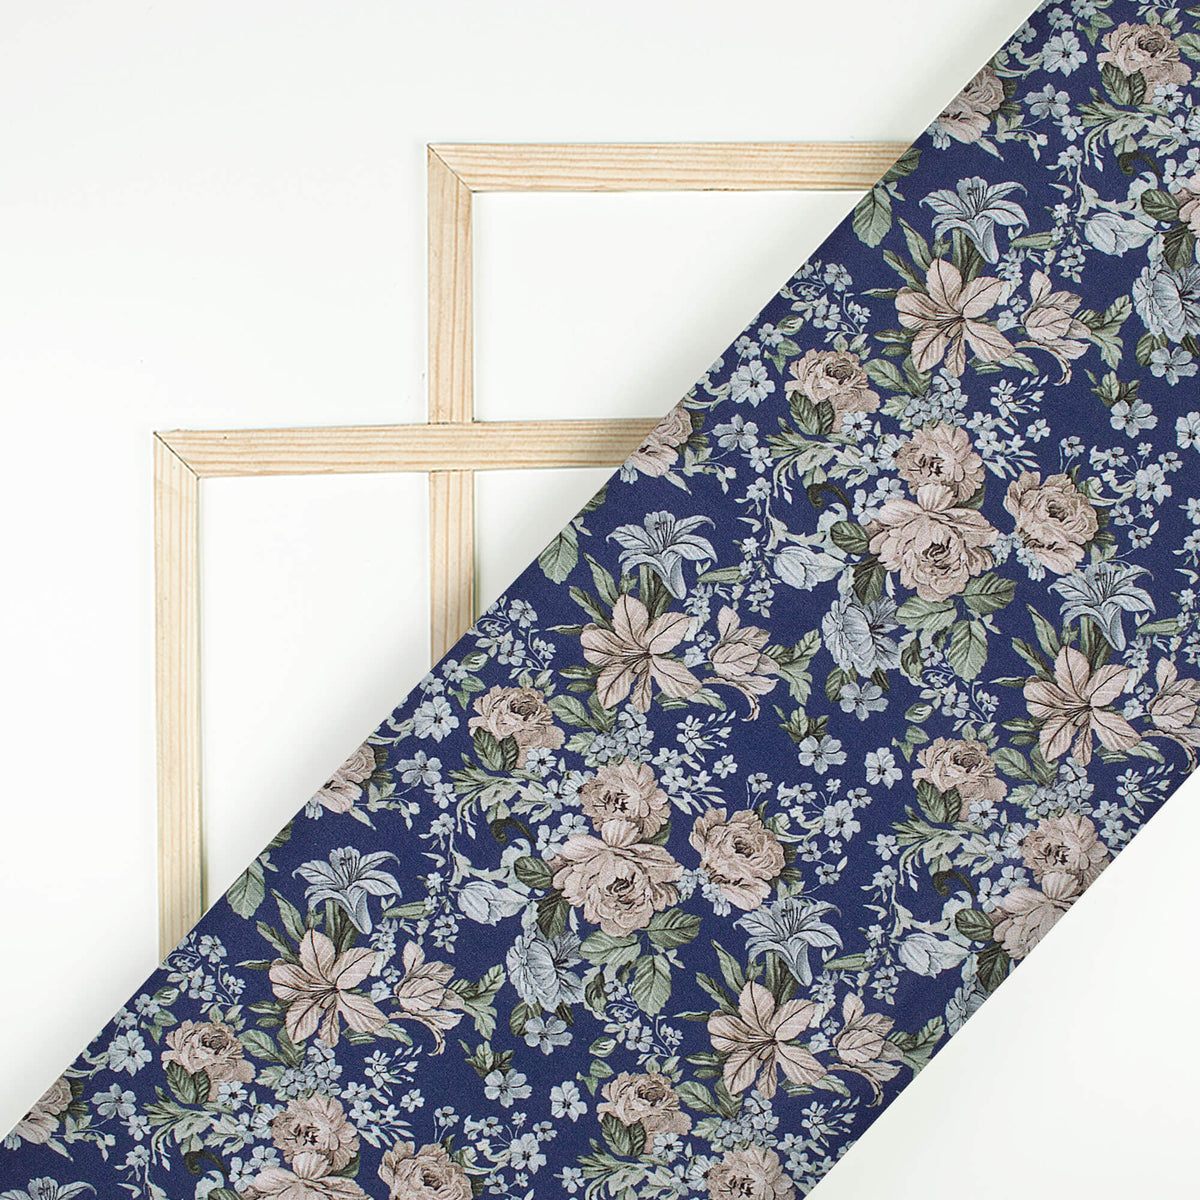 Navy Blue And Fawn Beige Floral Pattern Digital Print Crepe Silk Fabric